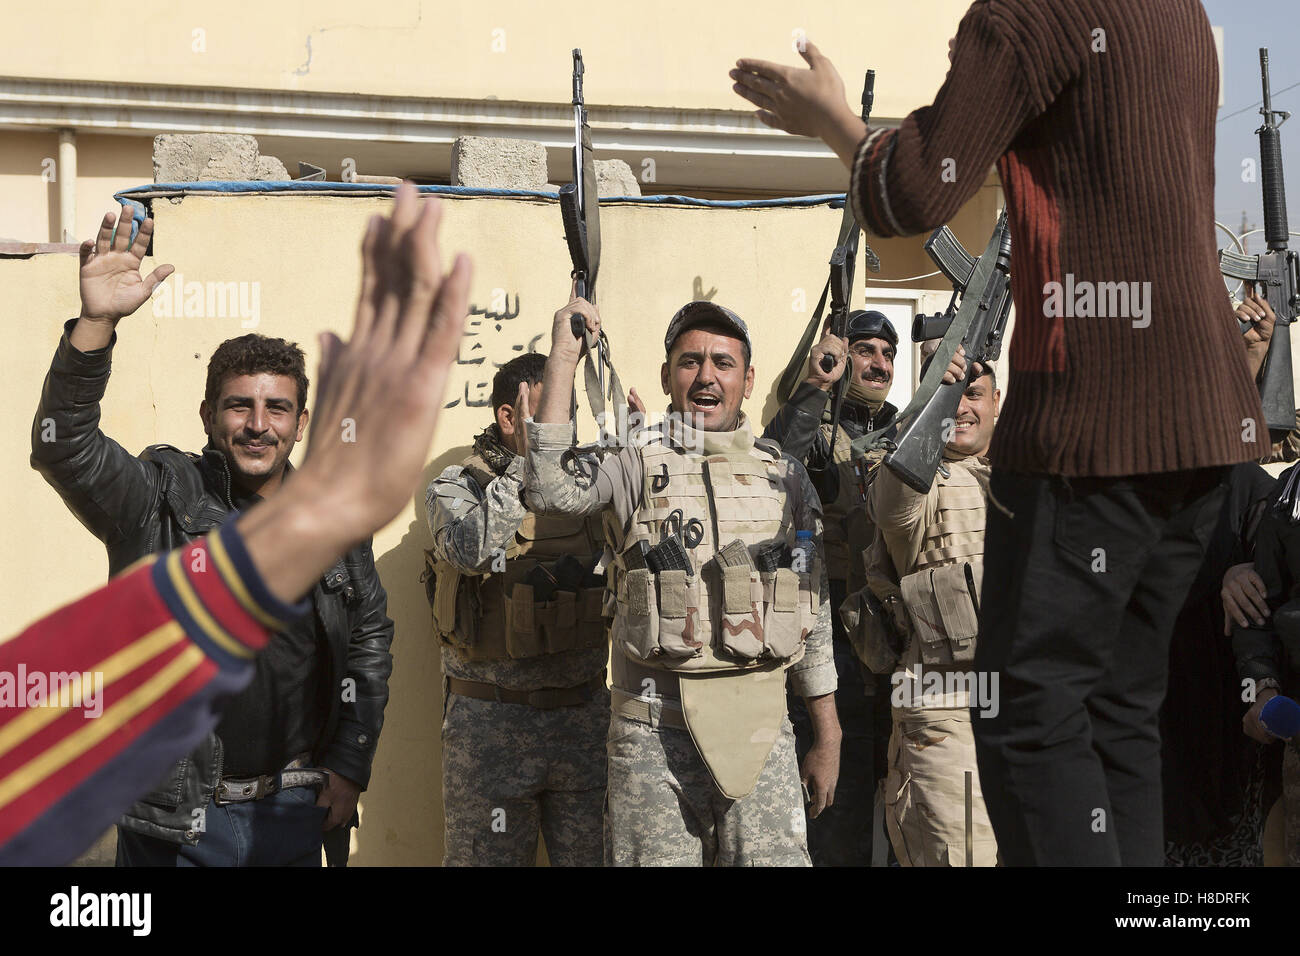 Mosul, Nineveh, Iraq. 11th Nov, 2016. Residents and Iraqi soldiers dance to music during a visit to Mosul's Al Antisar district by soldiers of the Iraqi Army's 9th Armoured Division. The Al Intisar district was taken four days ago by Iraqi Security Forces (ISF) and, despite its proximity to ongoing fighting between ISF and ISIS militants, many residents still live in the settlement without regular power and water and with dwindling food supplies. © Matt Cetti-Roberts/ZUMA Wire/Alamy Live News Stock Photo